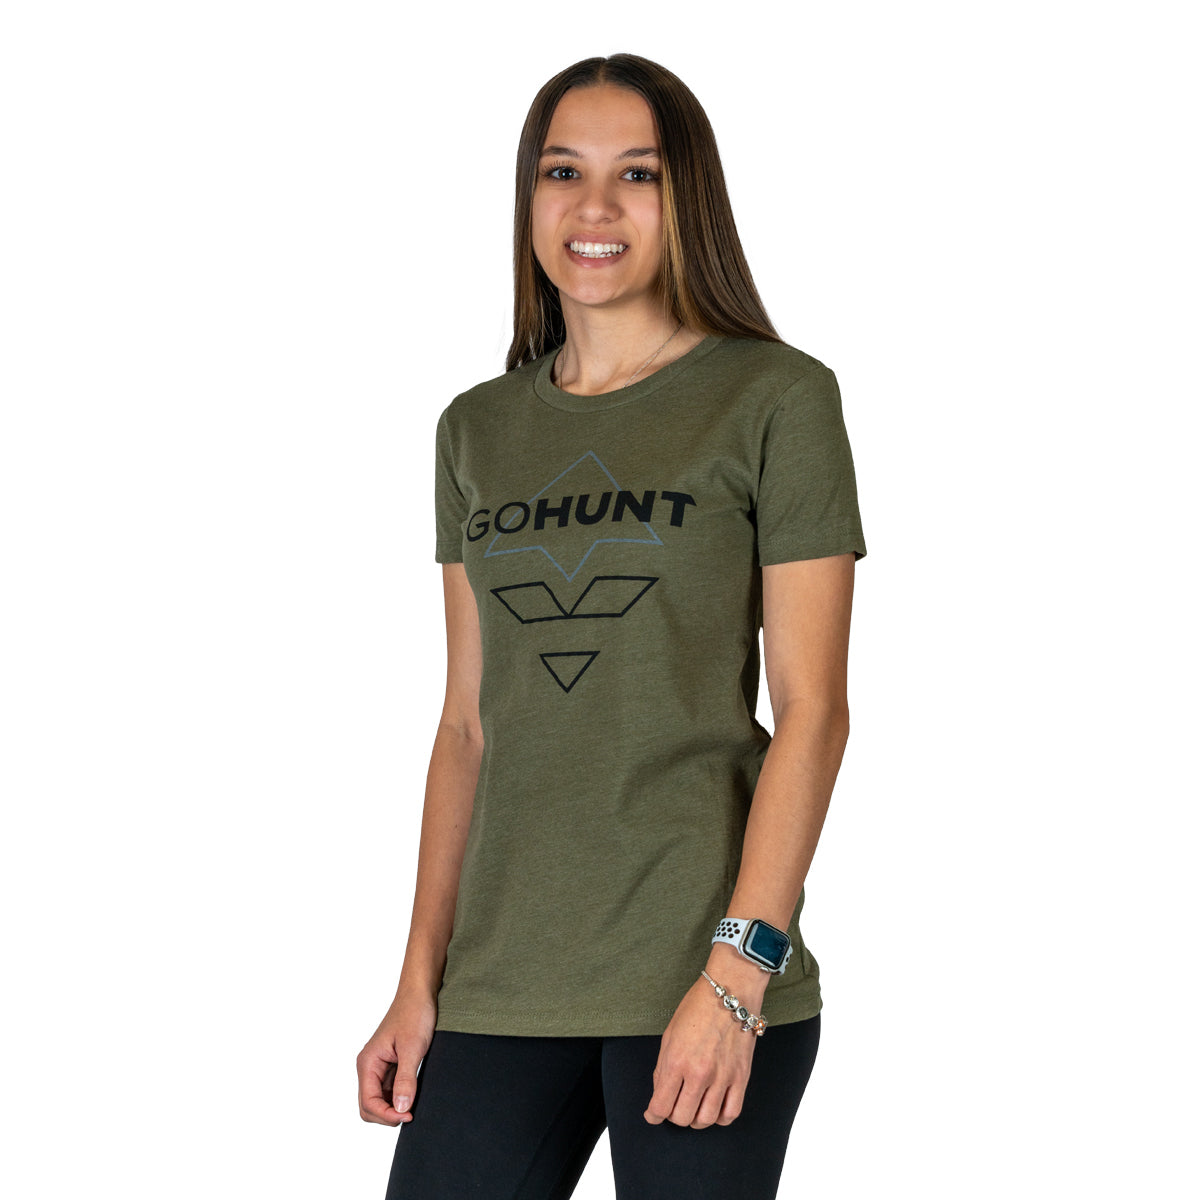 GOHUNT Women's Logo T in Army Green by GOHUNT | GOHUNT - GOHUNT Shop